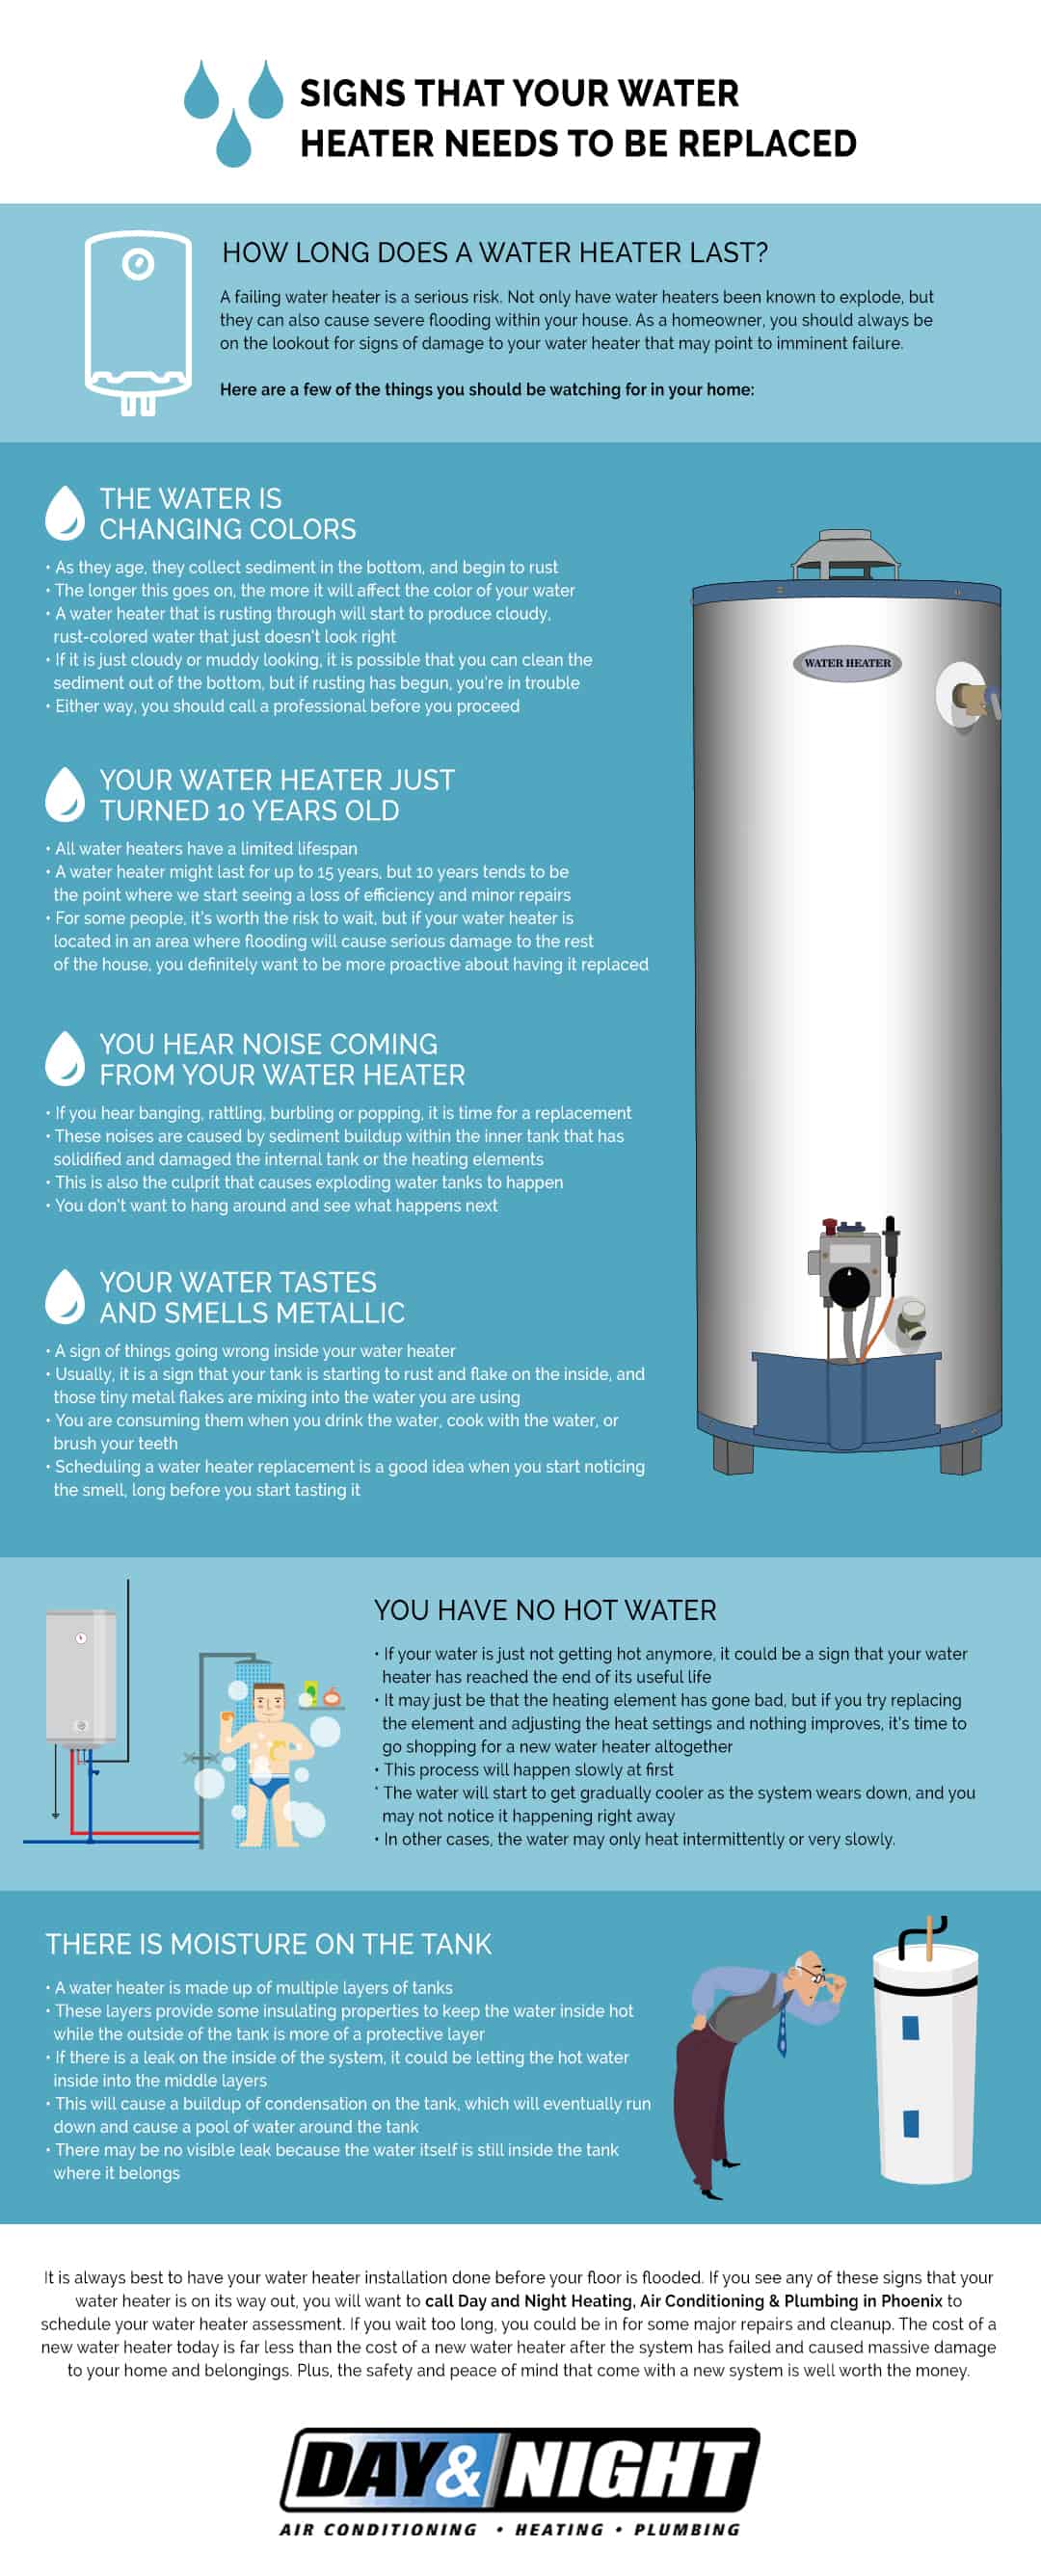 Signs that Your Water Heater Needs to Be Replaced